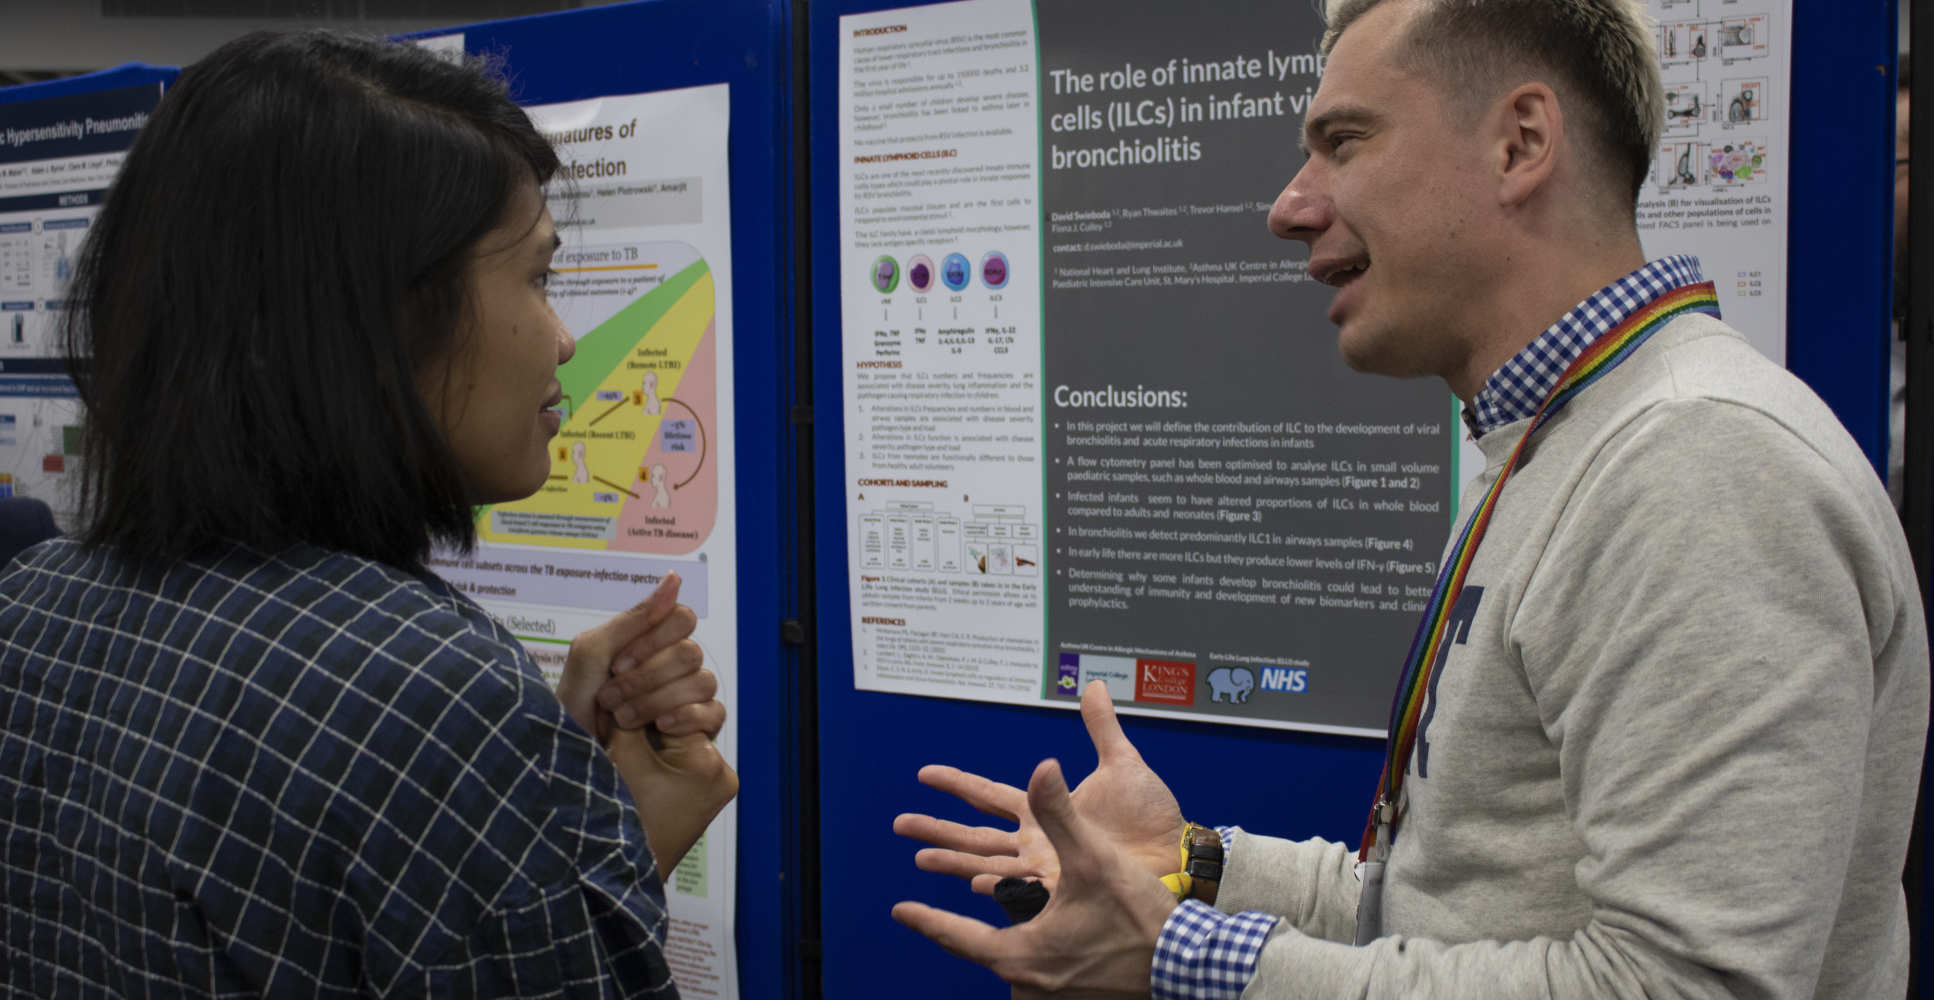 Poster presentation by researcher